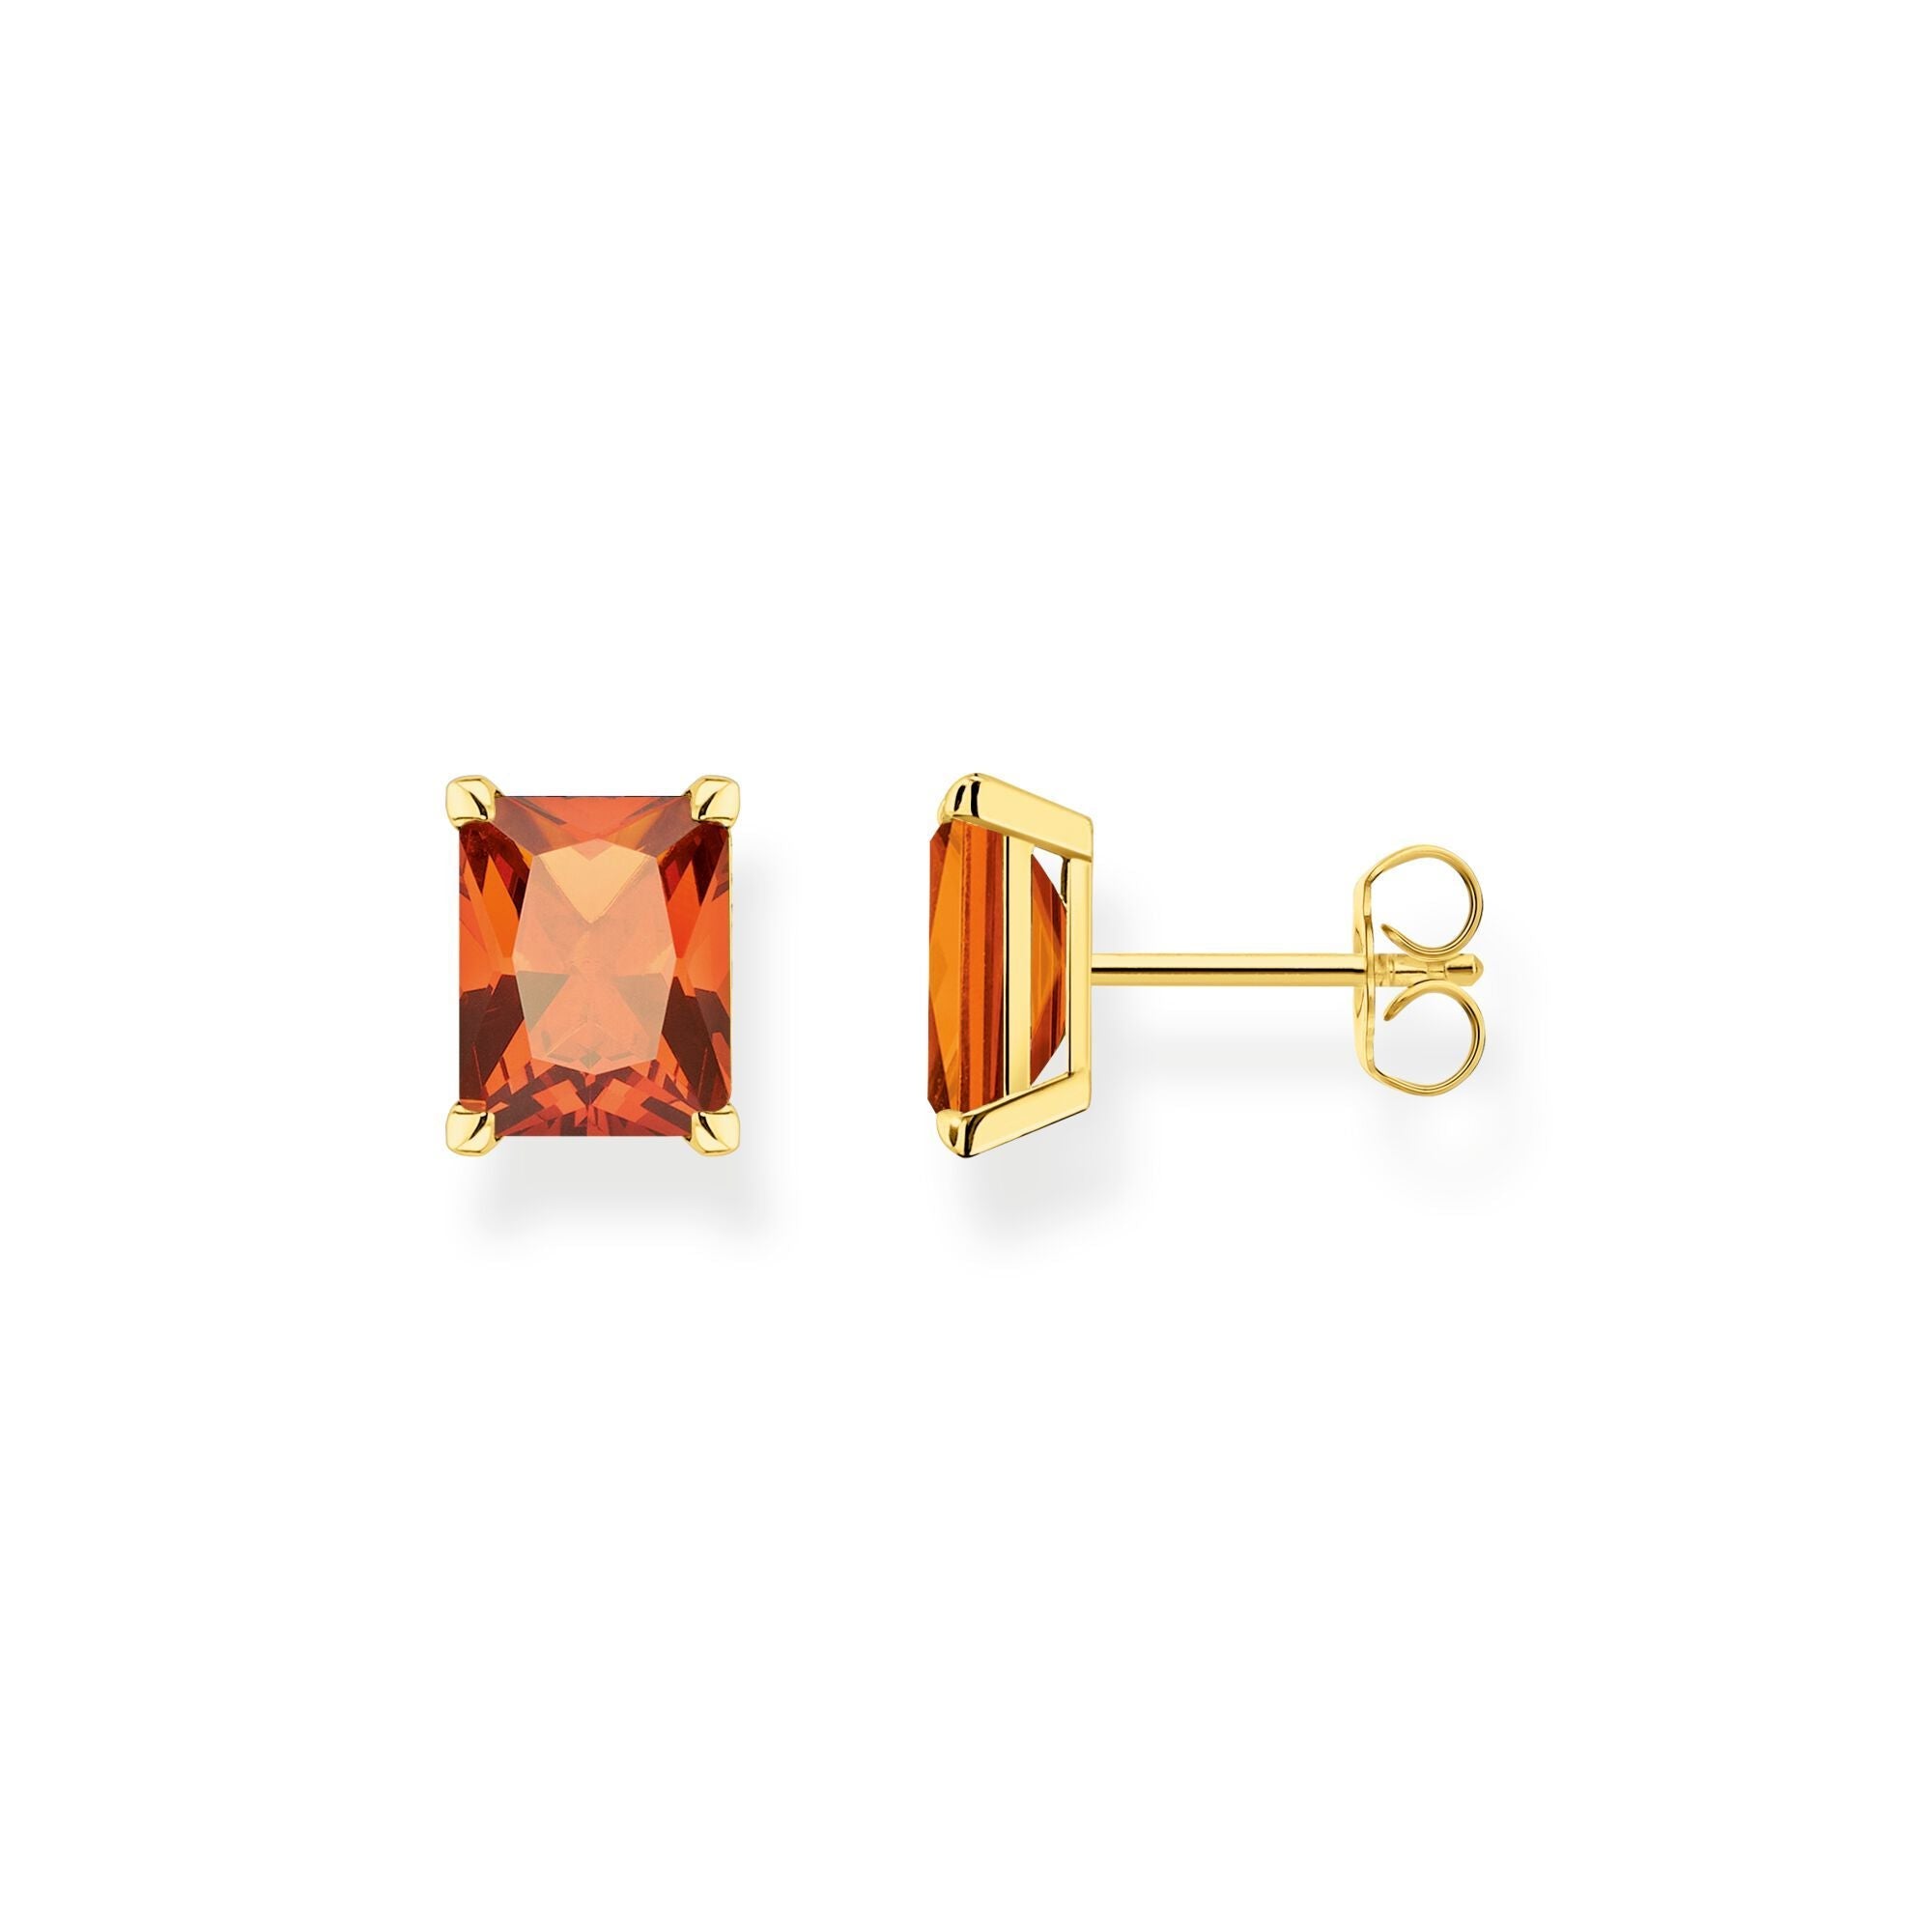 Thomas Sabo Gold Plated Sterling Silver Orange Stone Stud Earrings